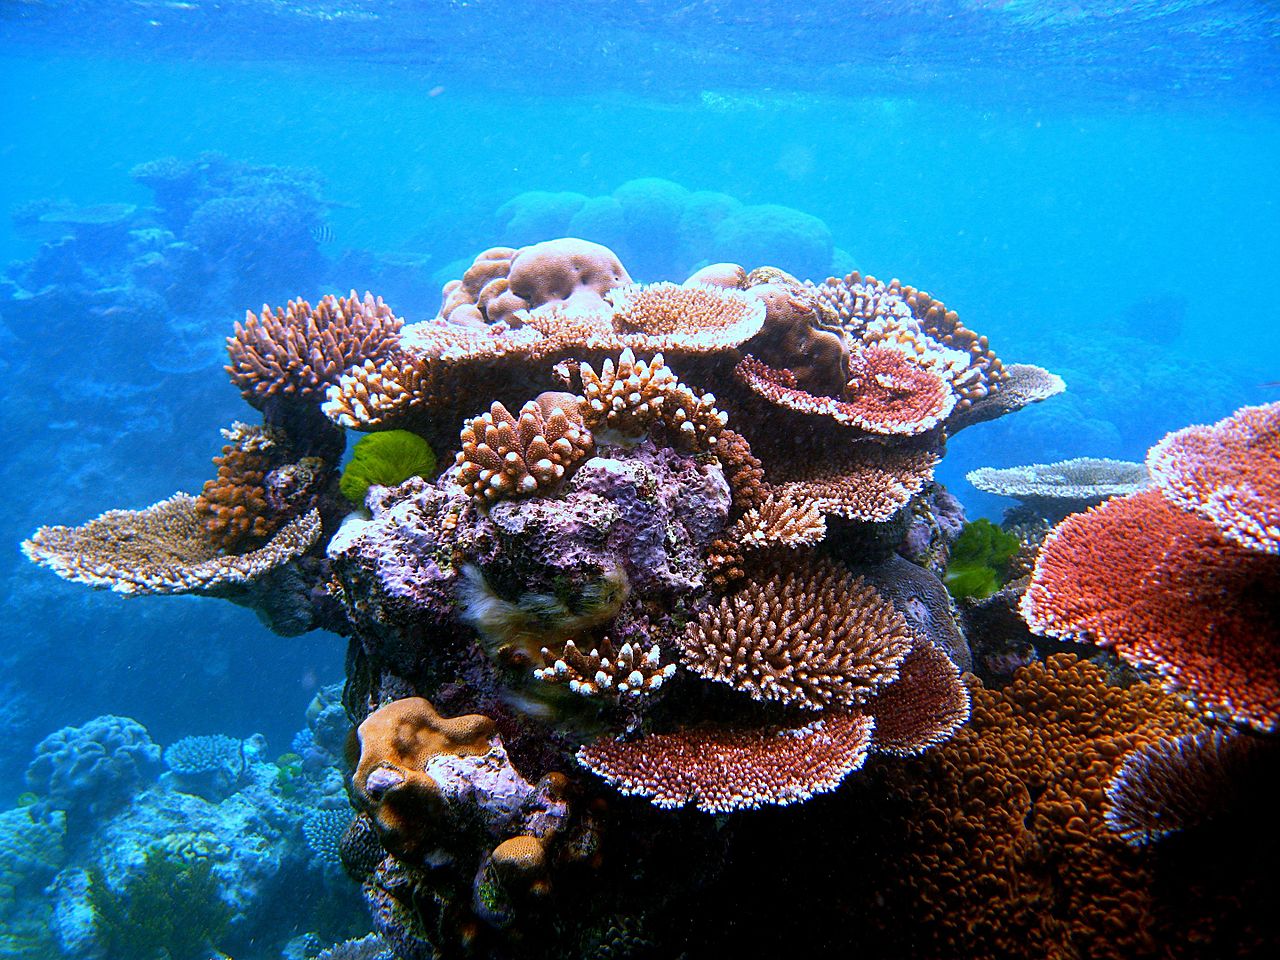 A variety of corals form an outcrop